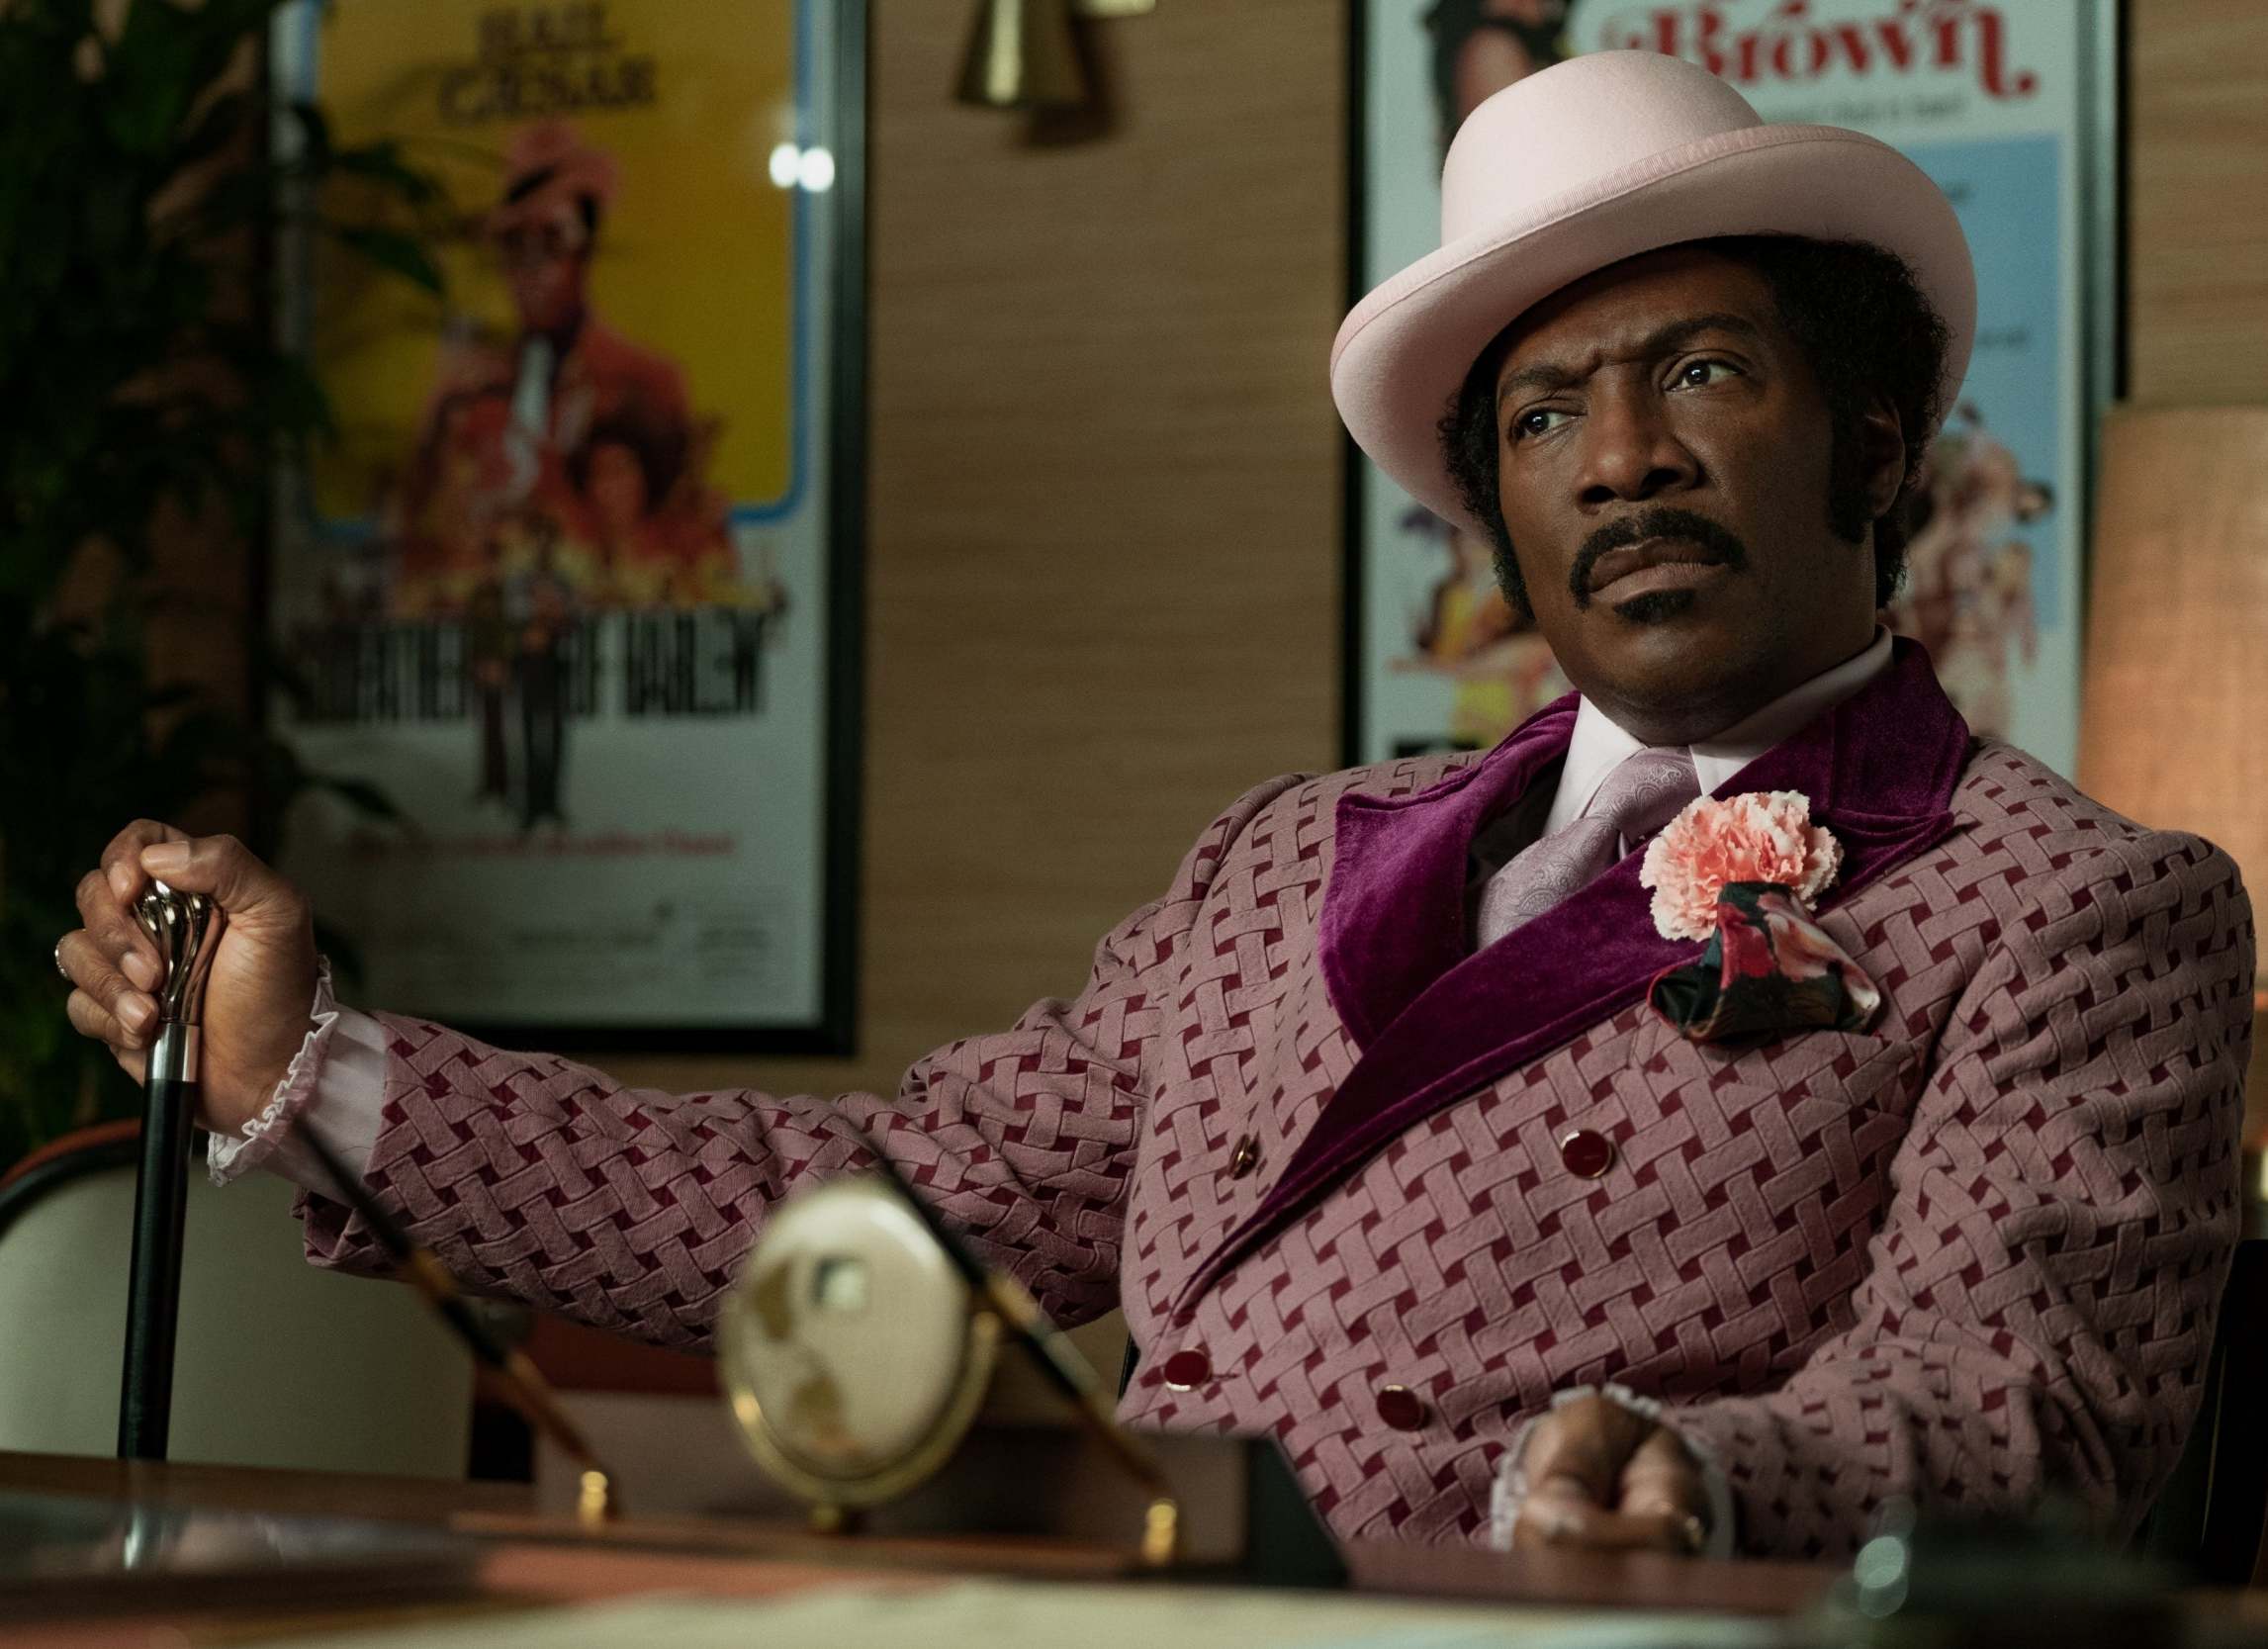 Eddie Murphy brings a complex figure to life in ‘Dolemite Is My Name’